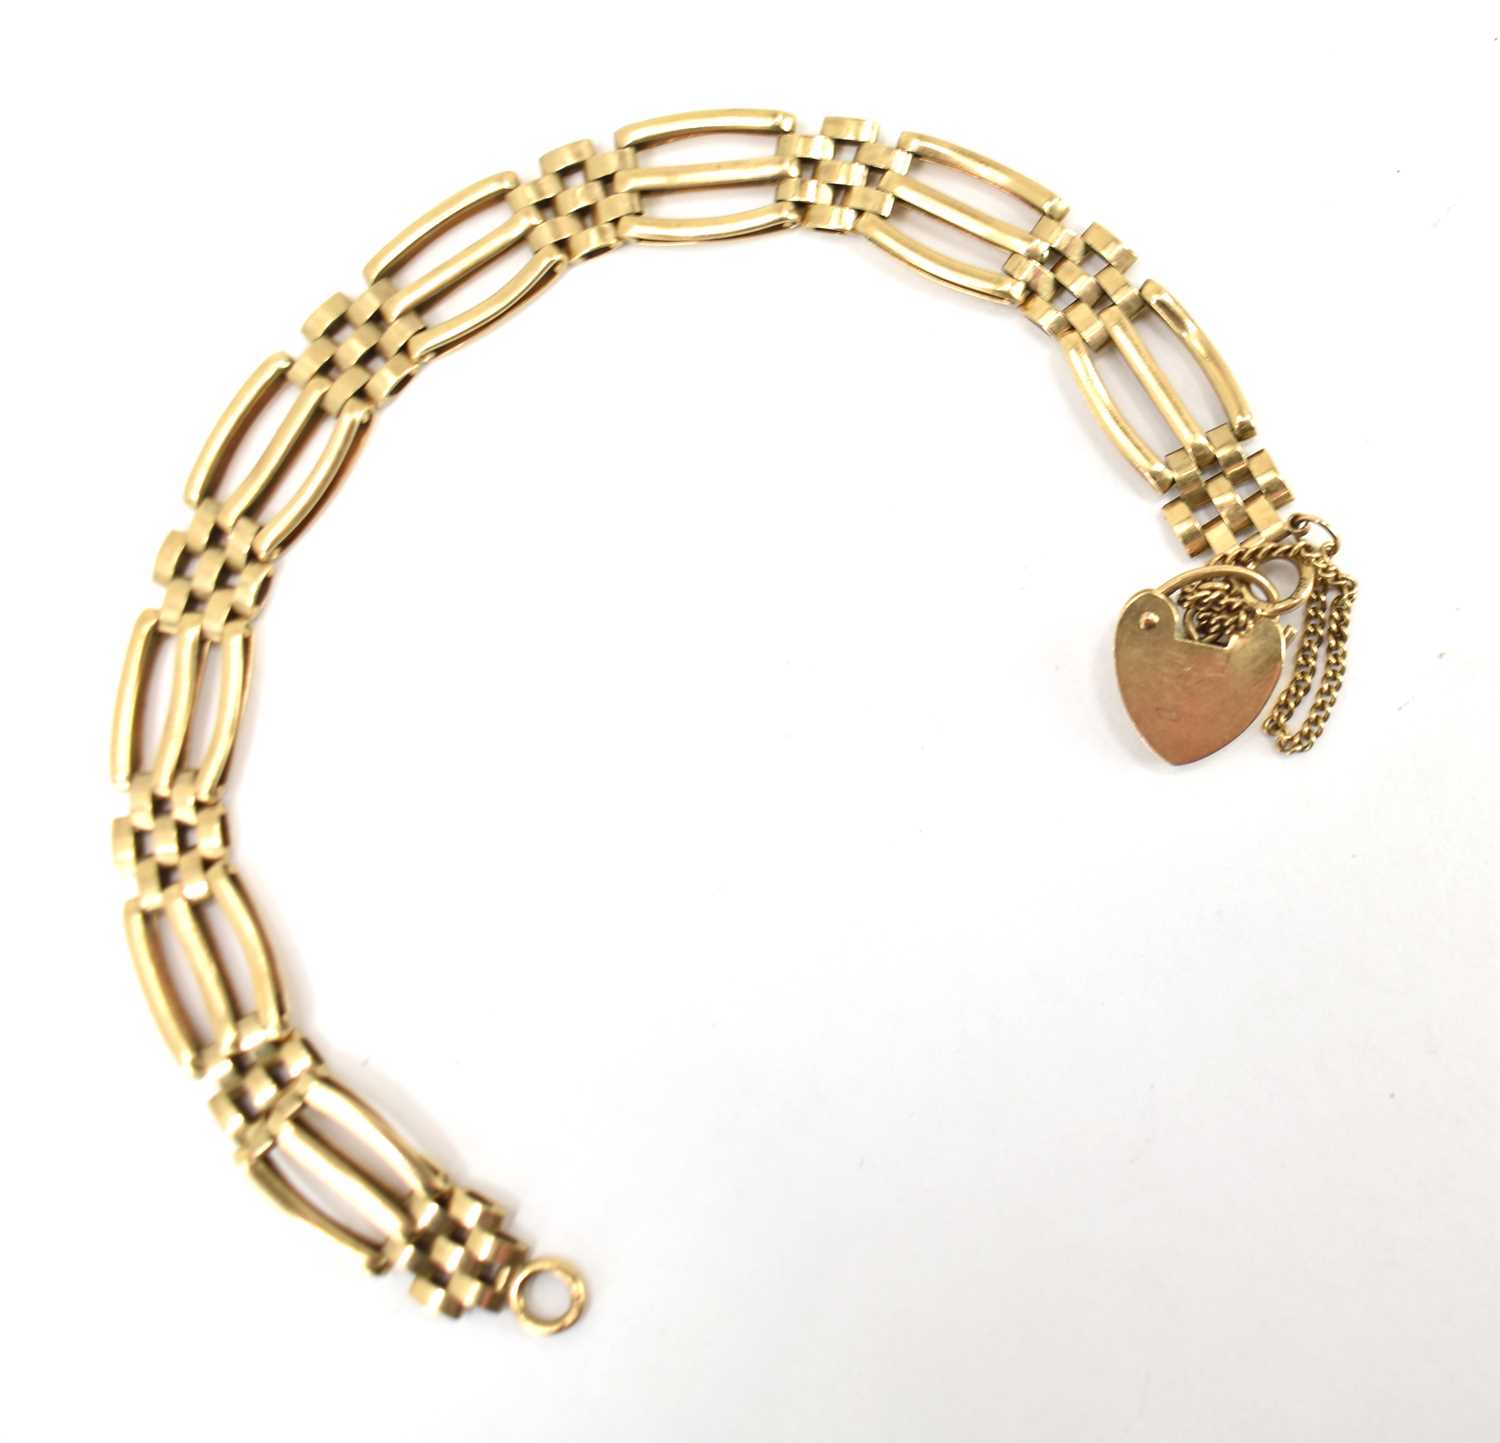 A 9ct gold three-bar link gate bracelet with 9ct gold heart-shaped padlock clasp, length 20cm, - Image 2 of 2